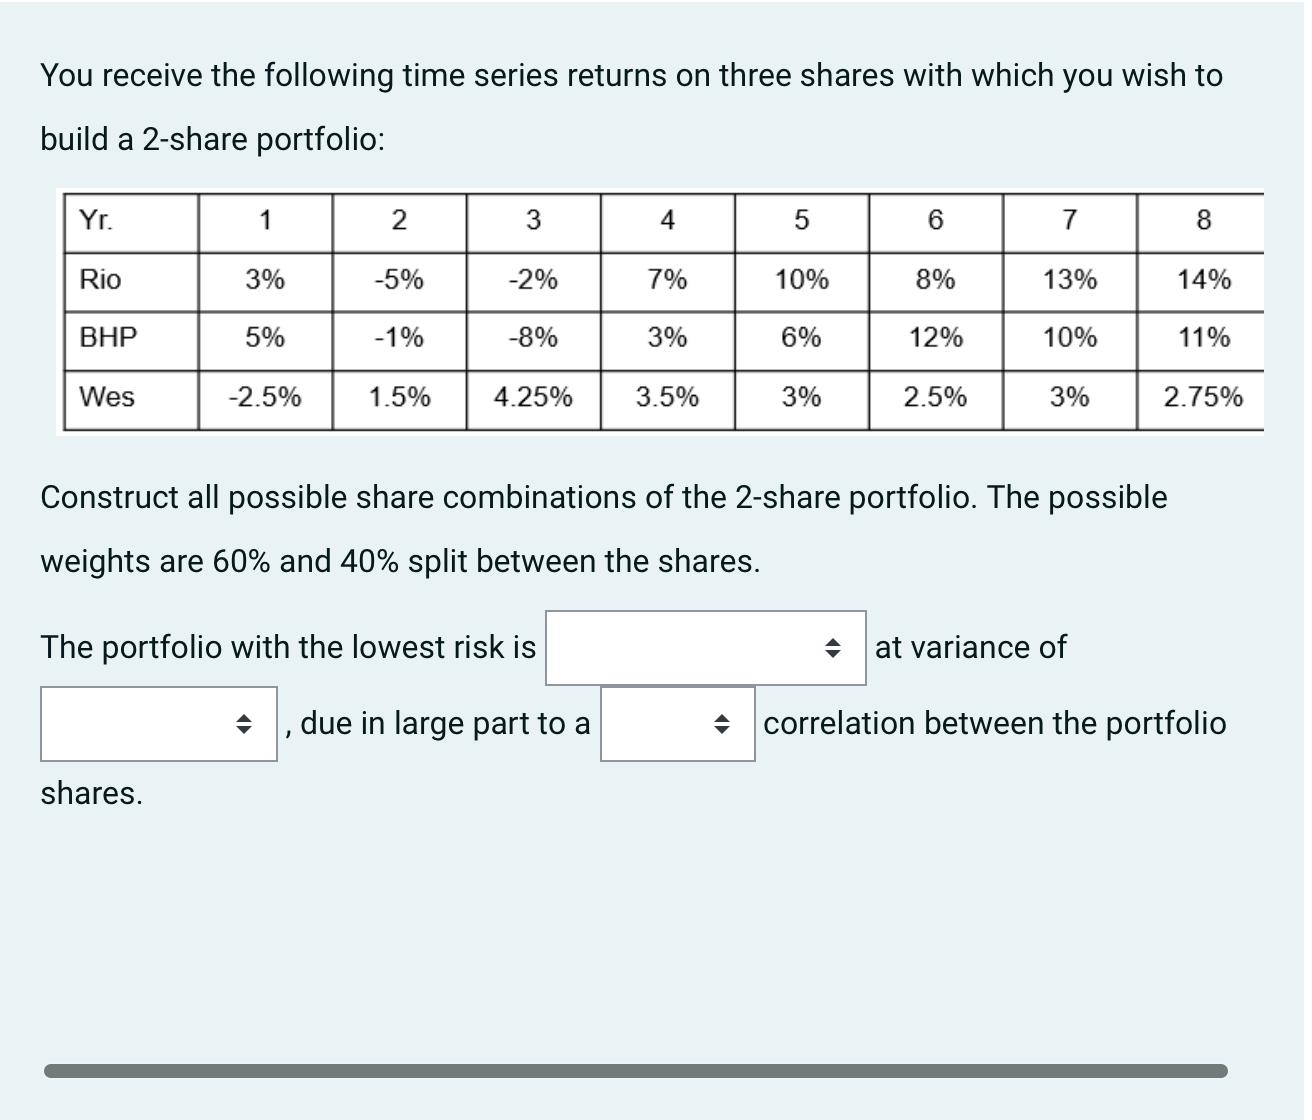 You receive the following time series returns on three shares with which you wish to build a 2-share